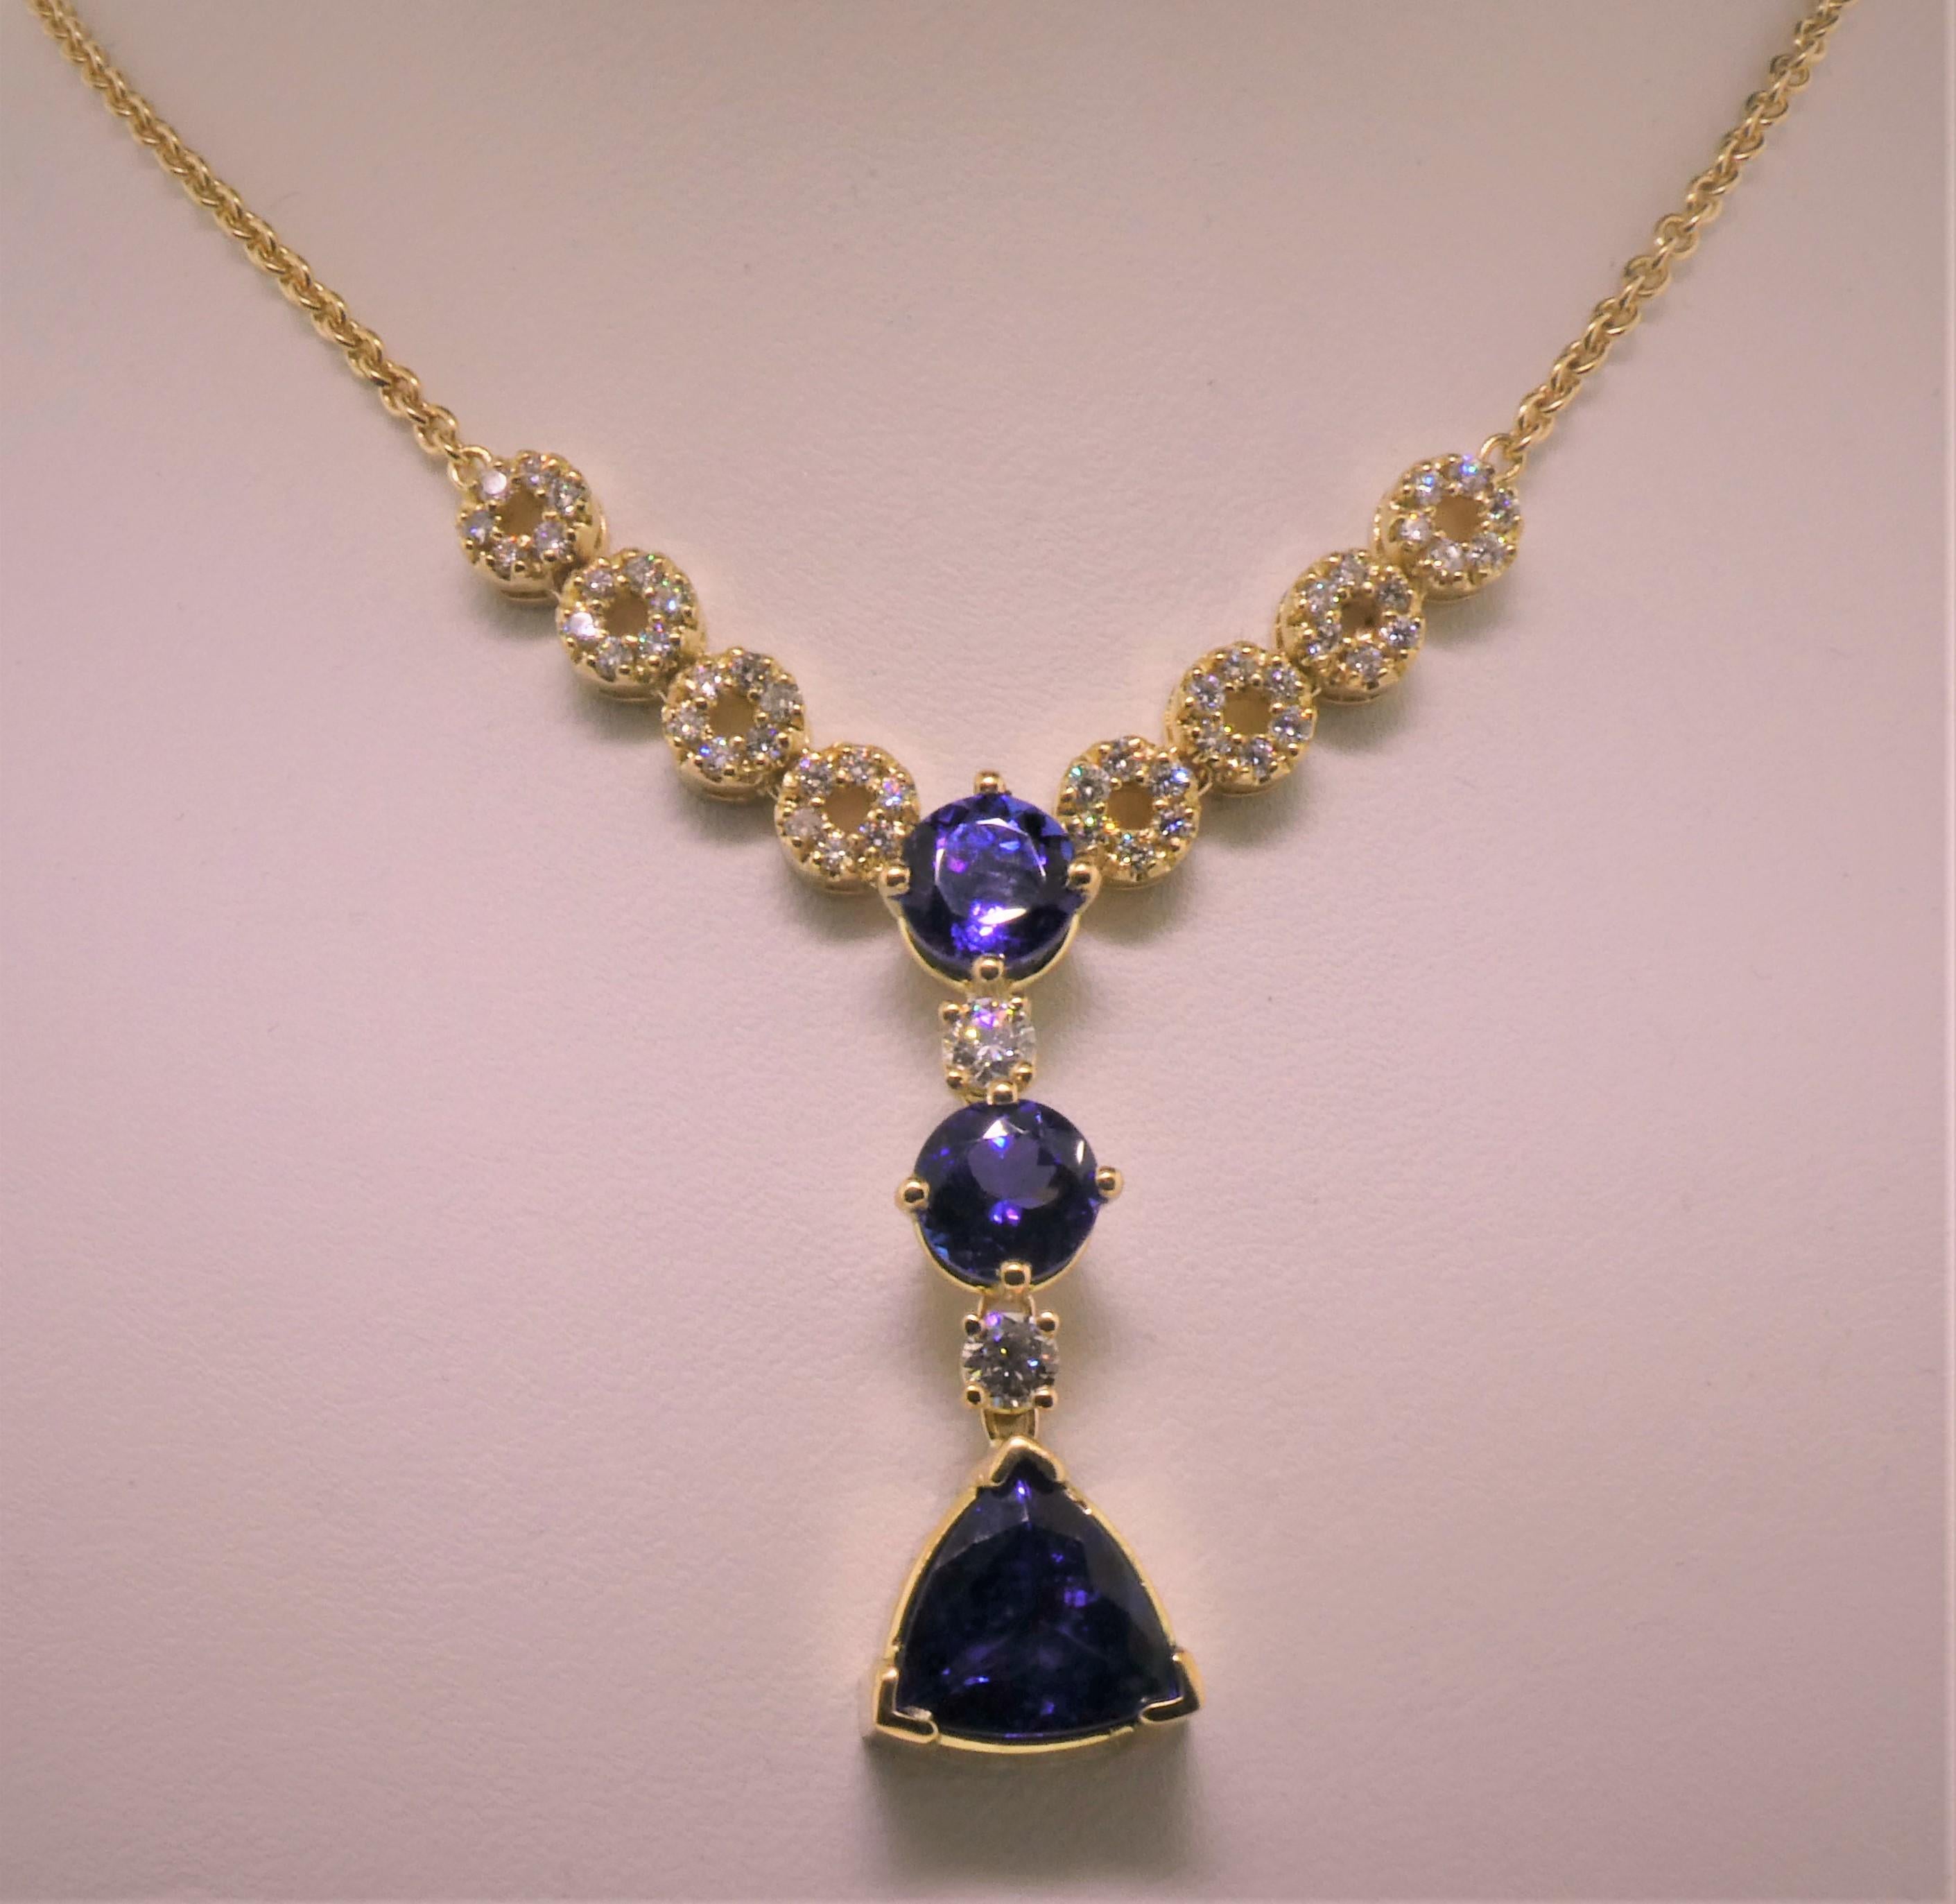 Conceived and designed by Michael Engelhardt, this beautiful Tanzanite (3 stones weighing 6.11 carats) and Diamond (2=0.34 + 48=0.70 Carats) pendant absolutely steals the show.  Light, Lively, easy to wear, dress it up, or dress it down, the stones